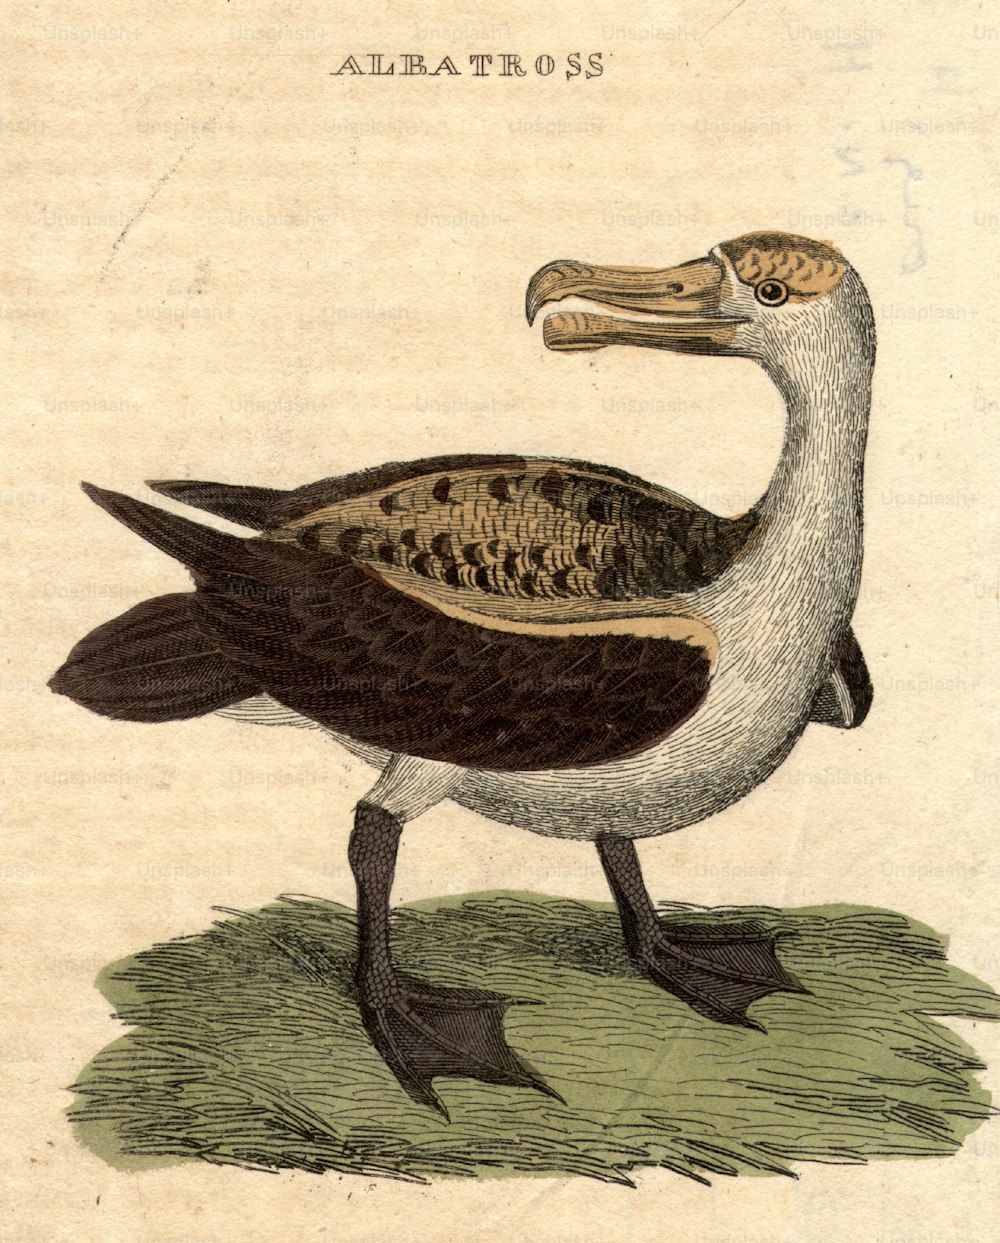 circa 1800:  An Albatross, a large-winged sea bird capable of long flights.  (Photo by Hulton Archive/Getty Images)